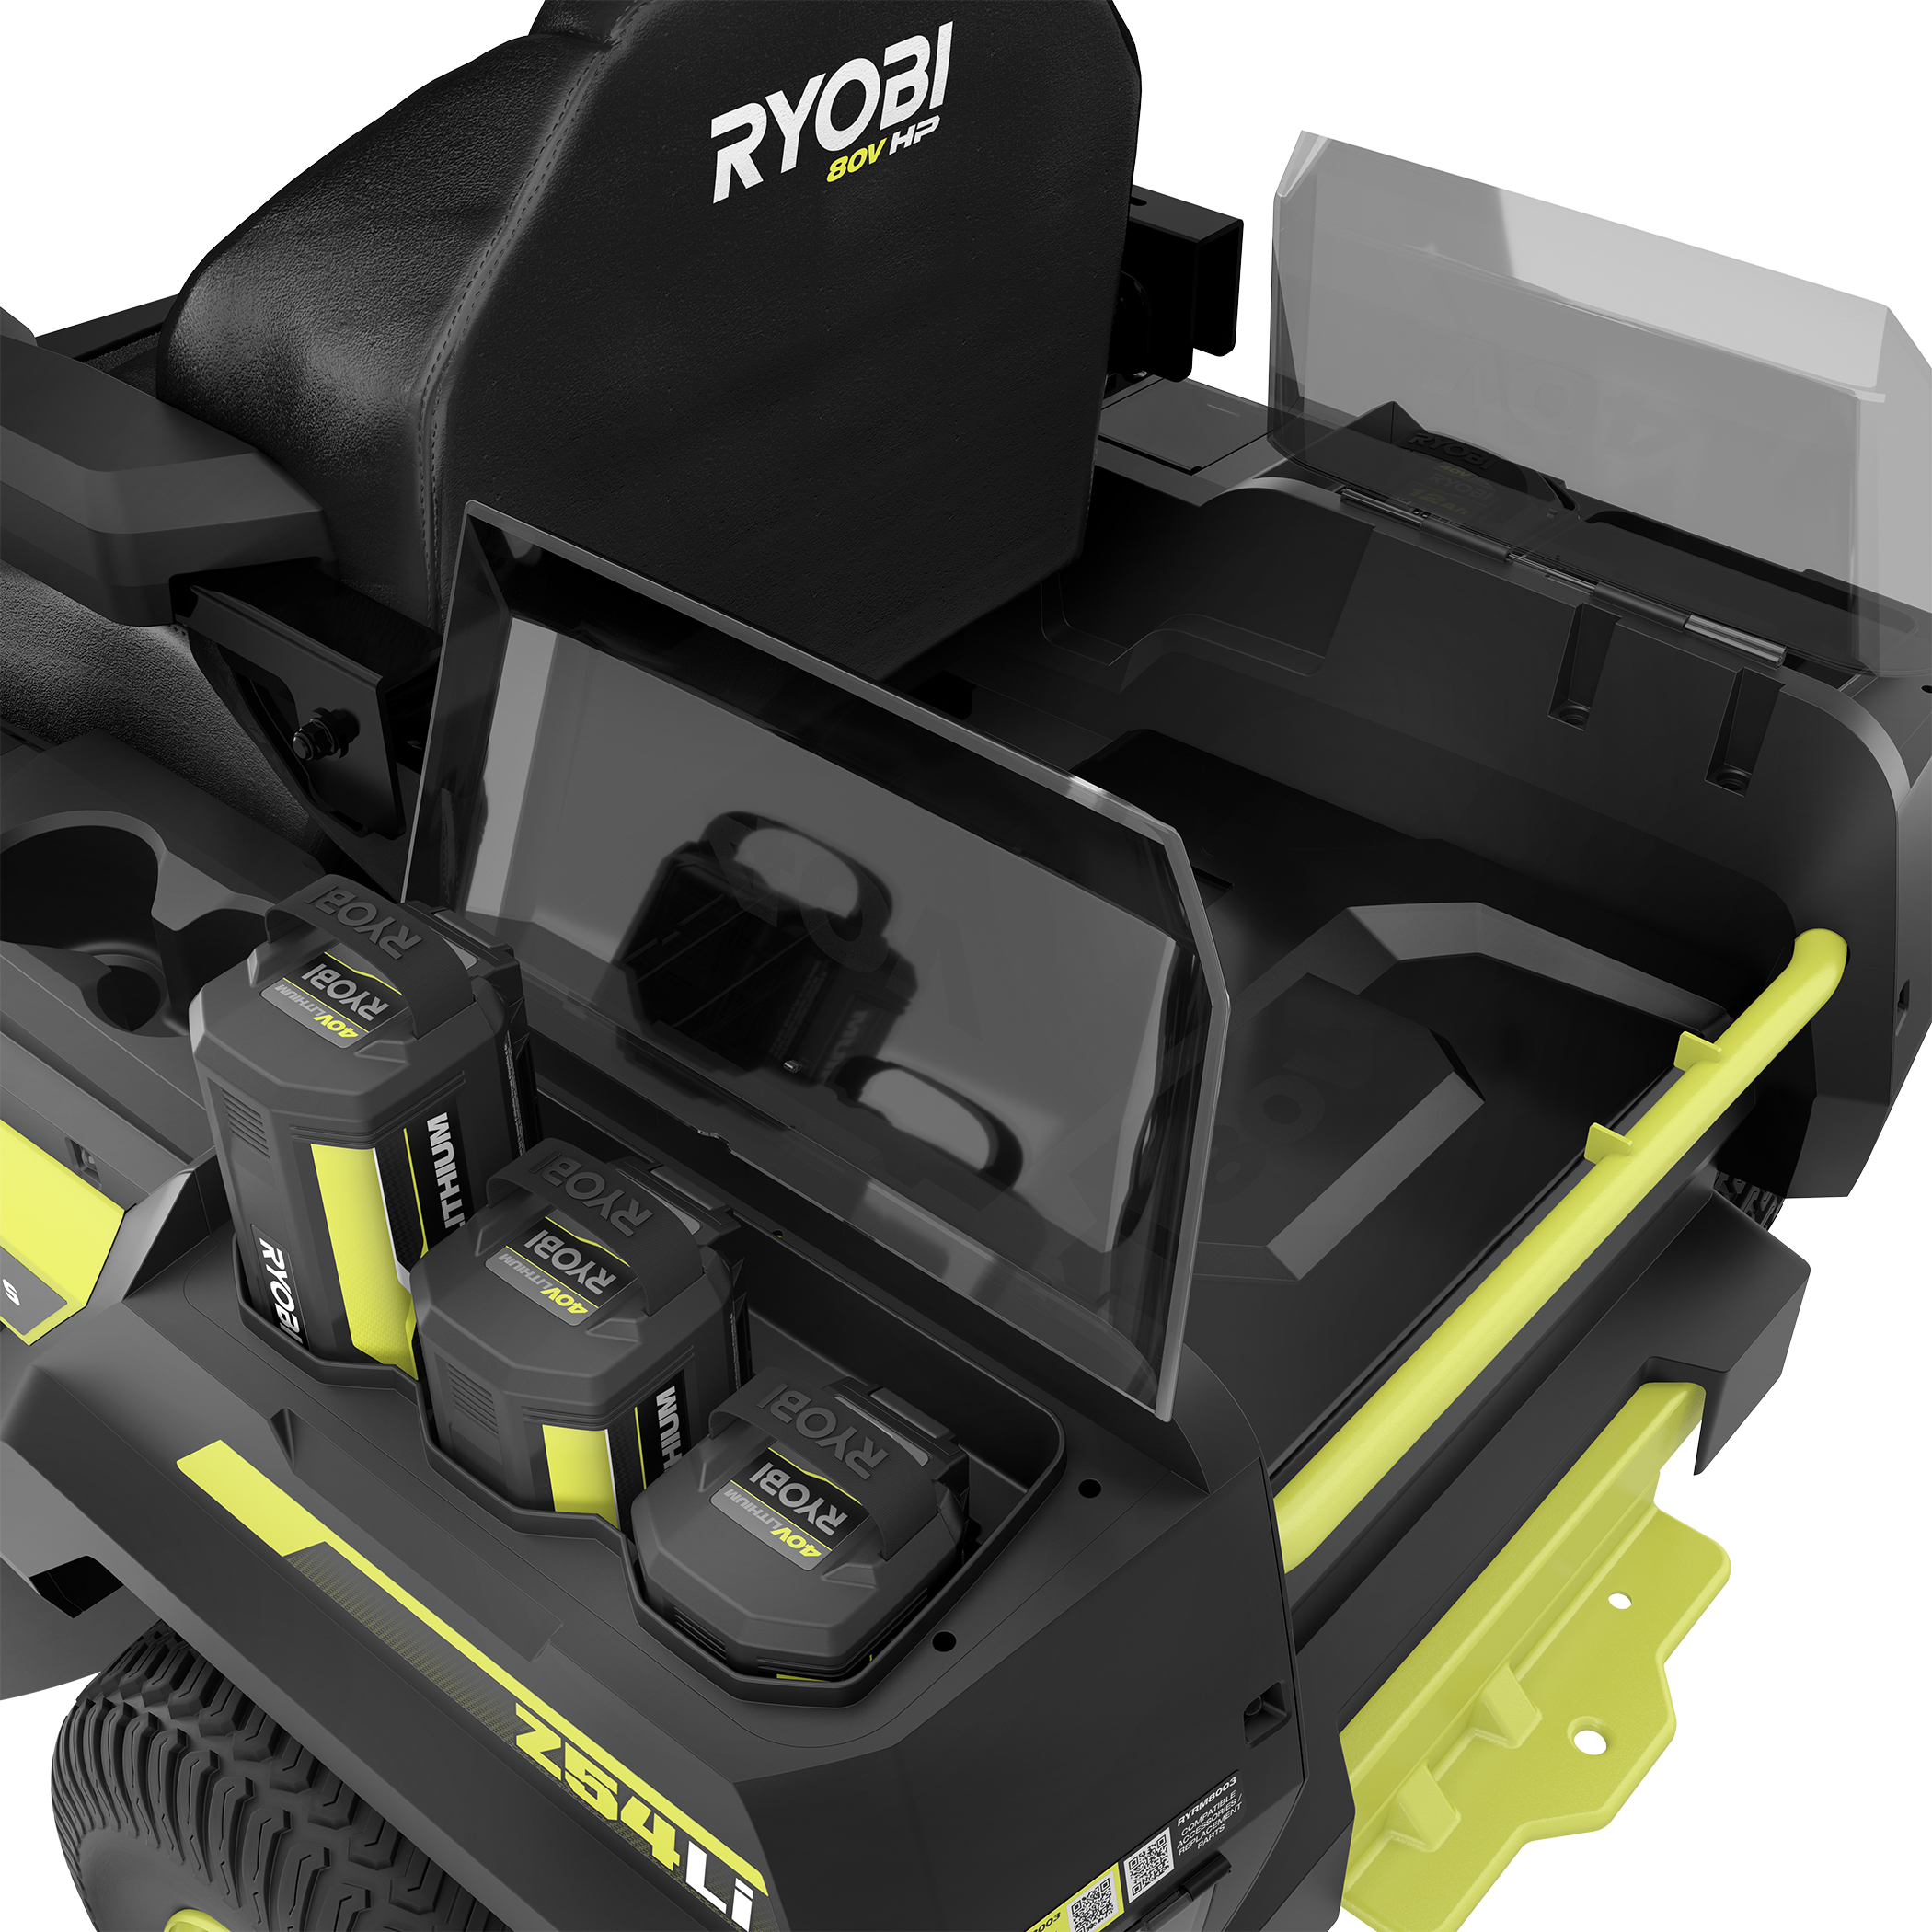 Compatible With The RYOBI 40V Platform of Over 75 40V Products